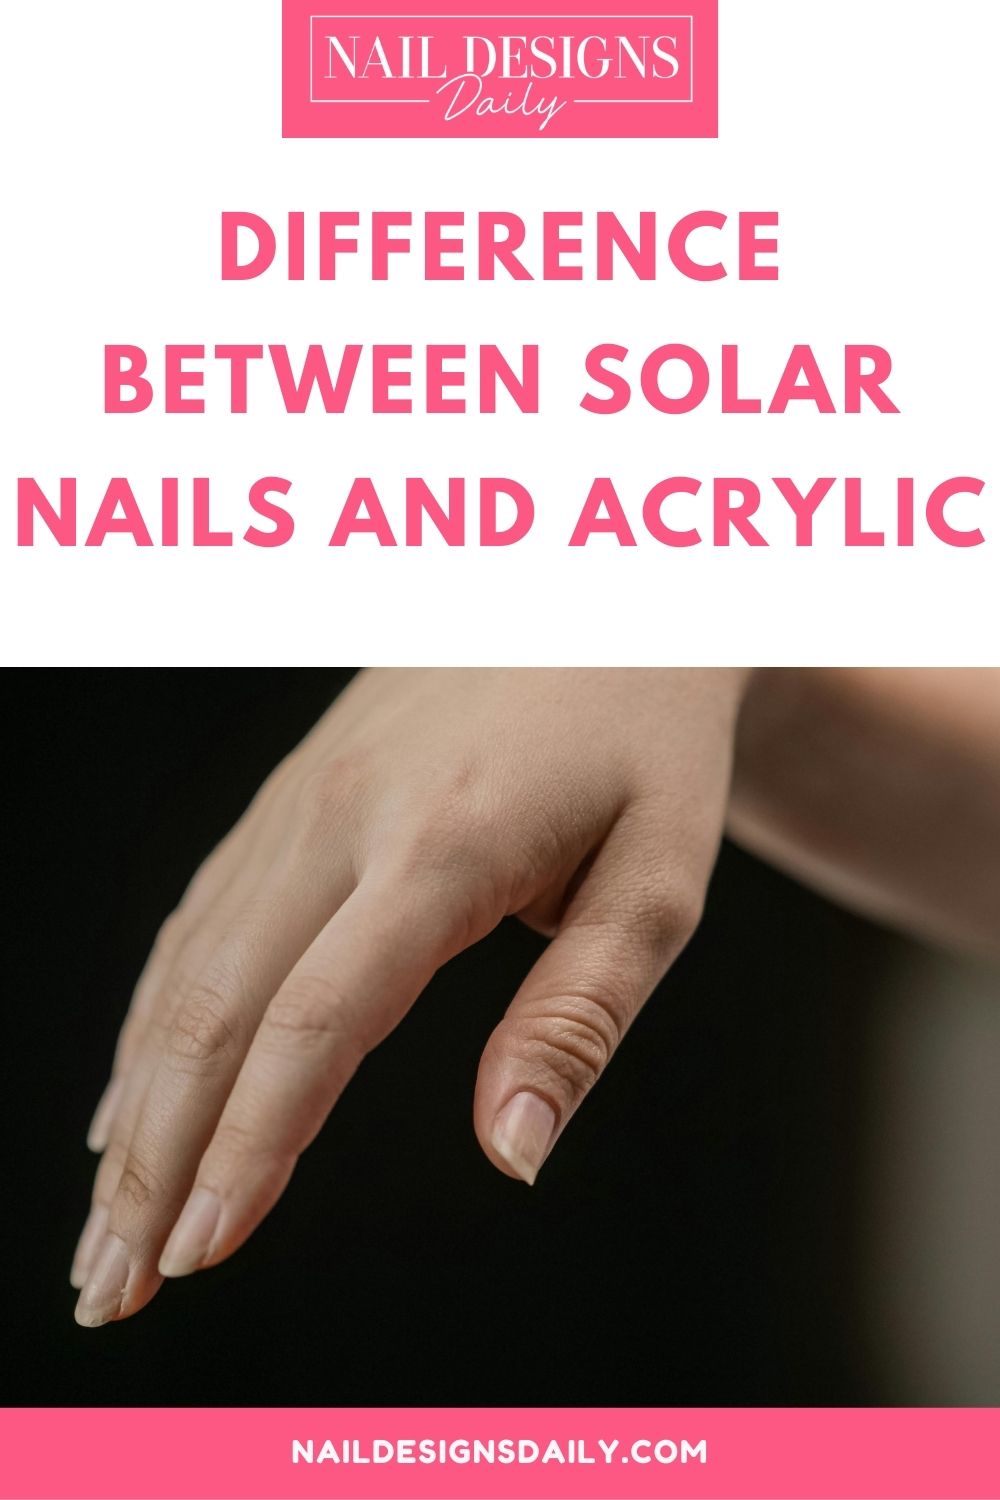 Difference Between Solar Nails And Acrylic